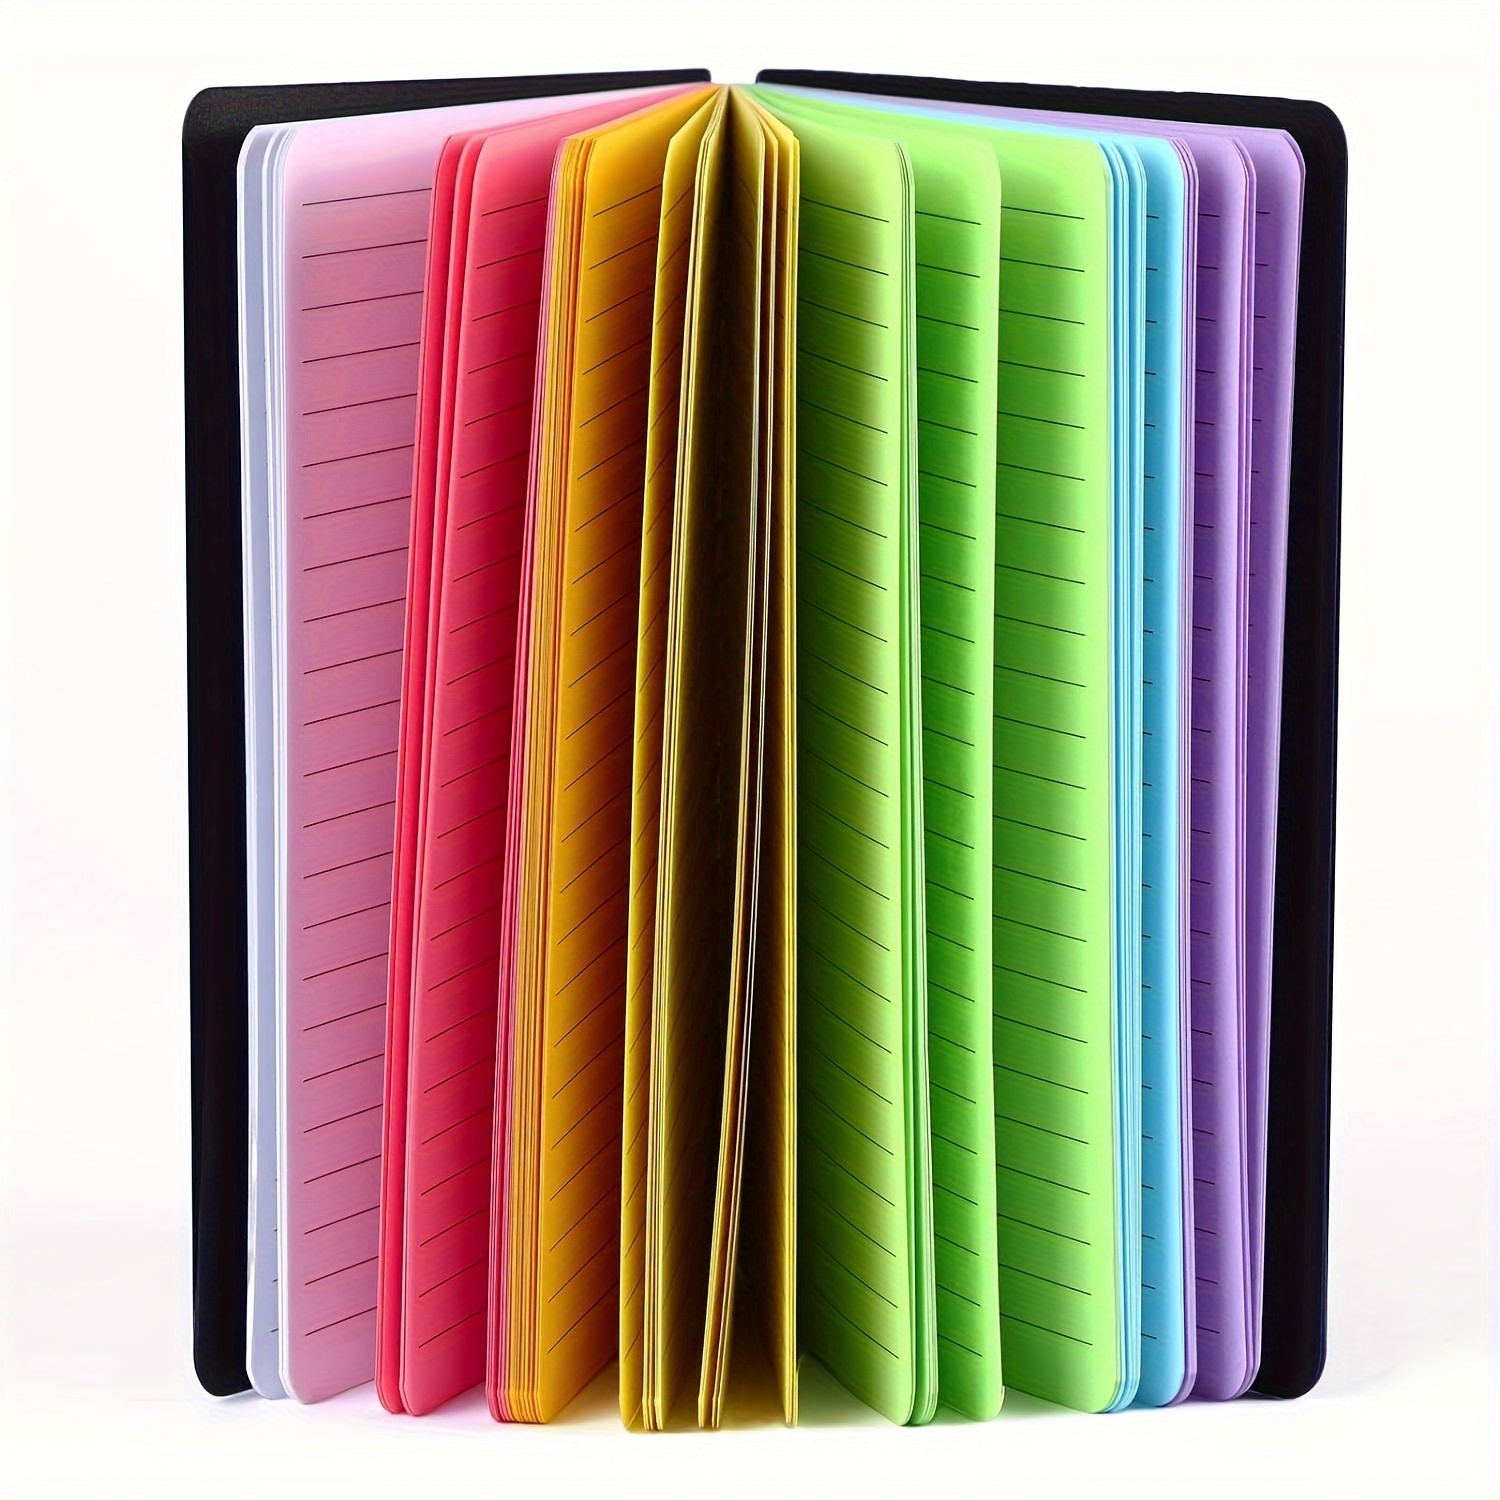 camelcamelcamel - Harloon 4 Pcs Spiral Notebook A5 Spiral Journal Notebook  Wirebound Wide Ruled Notebook Subject Perforated Notepad Memo Books, 7  Bright Neon Colored Paper for School Office, 105 Sheets/ 210 Pages